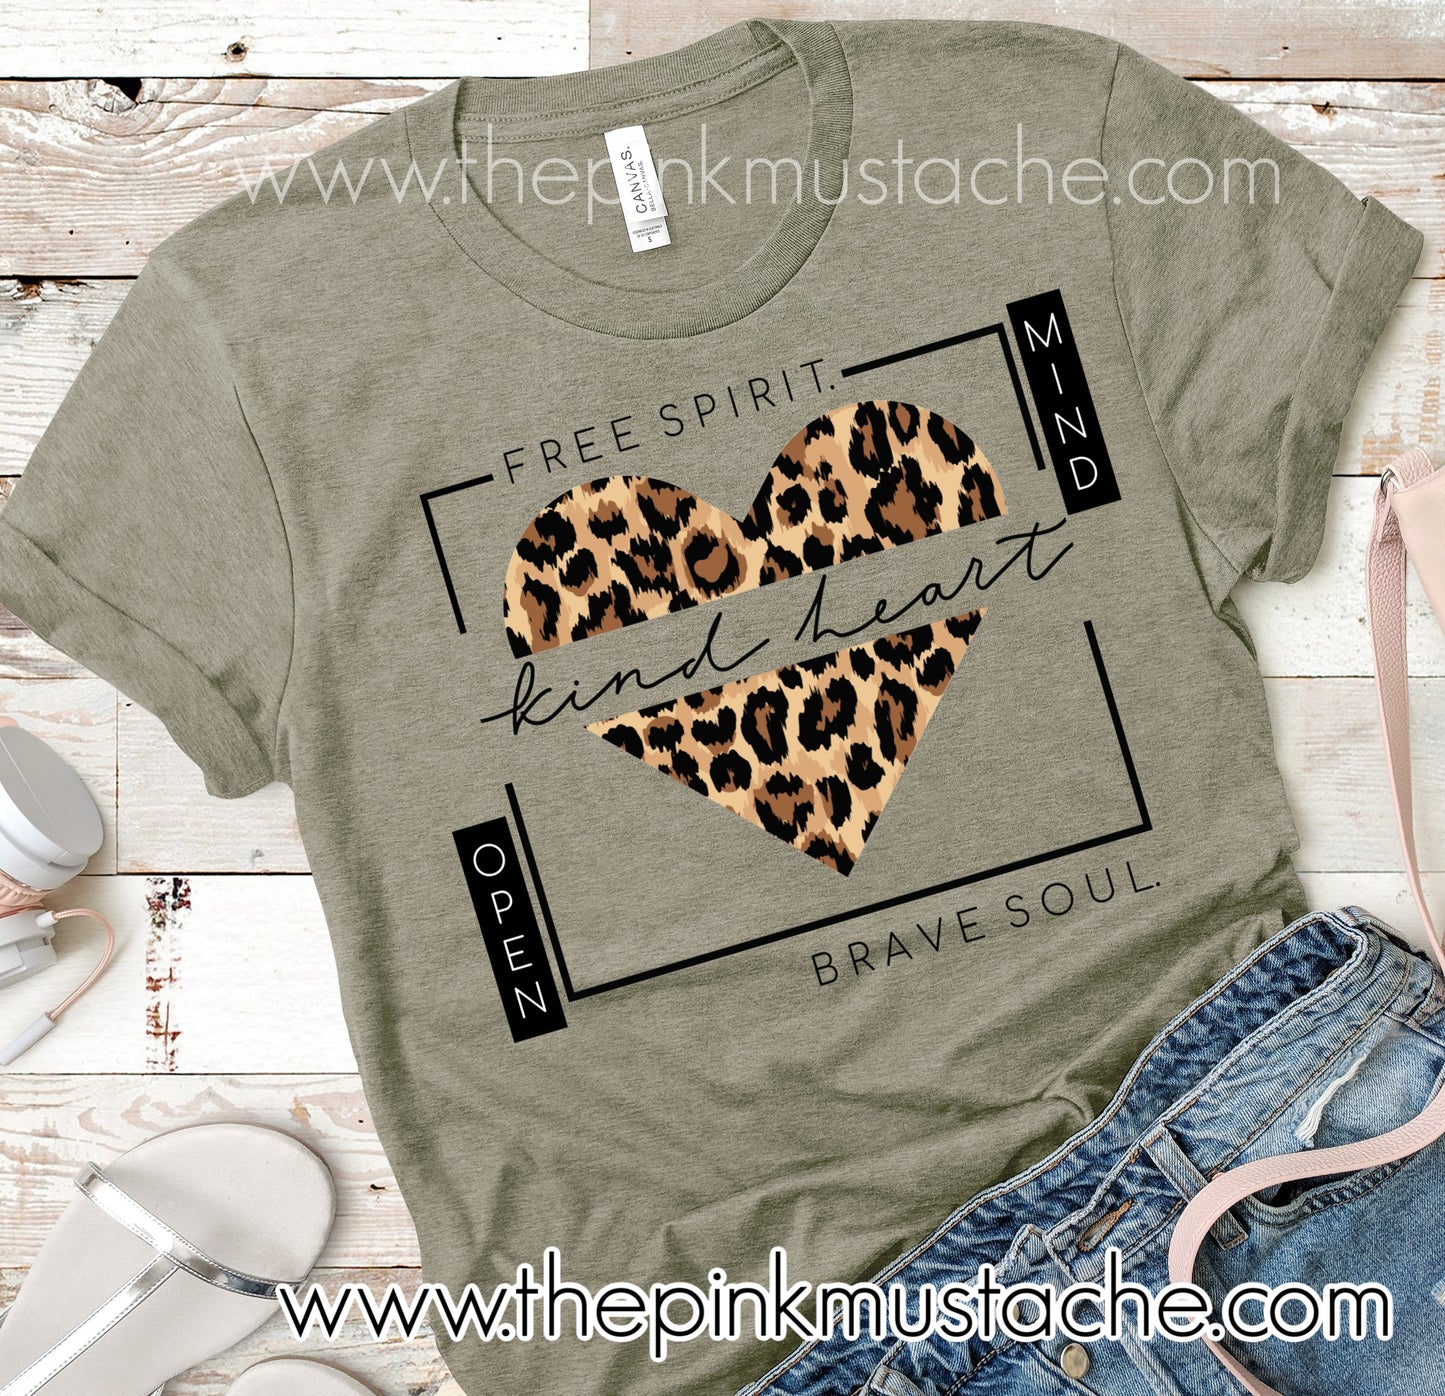 Free Spirit Kind Heart Brave Soul Open Mind Tee/ Positive Heart Leopard Tee / Youth and Adult Sizing/Teachers Tee/ Mom's Tee/ Gift for Her/